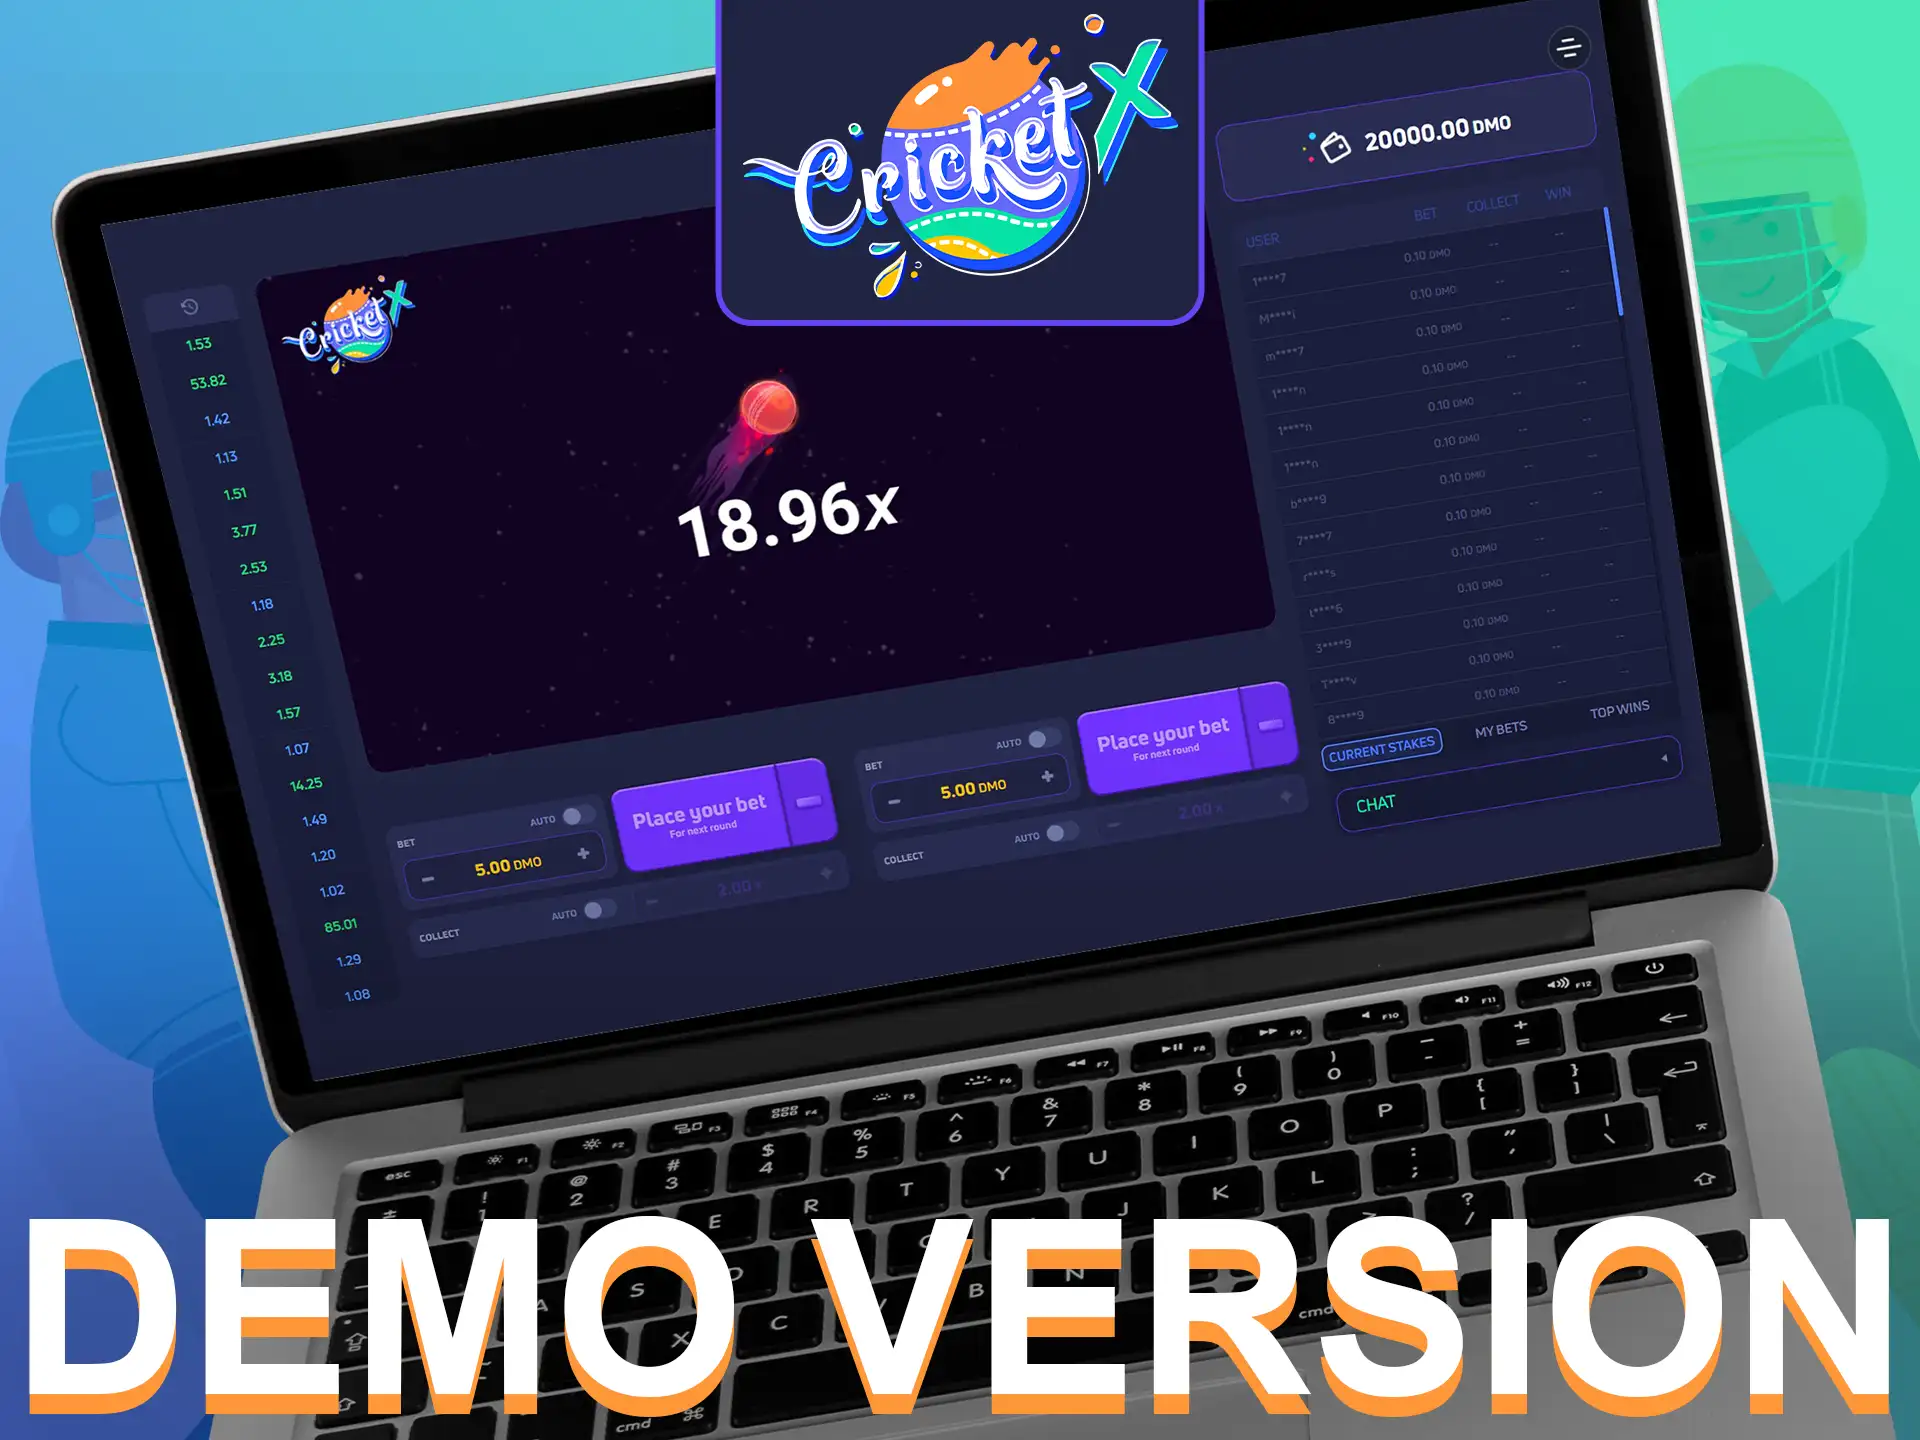 The demo version of Cricket X allows you to test the main features: Autoplay and Autocashout.